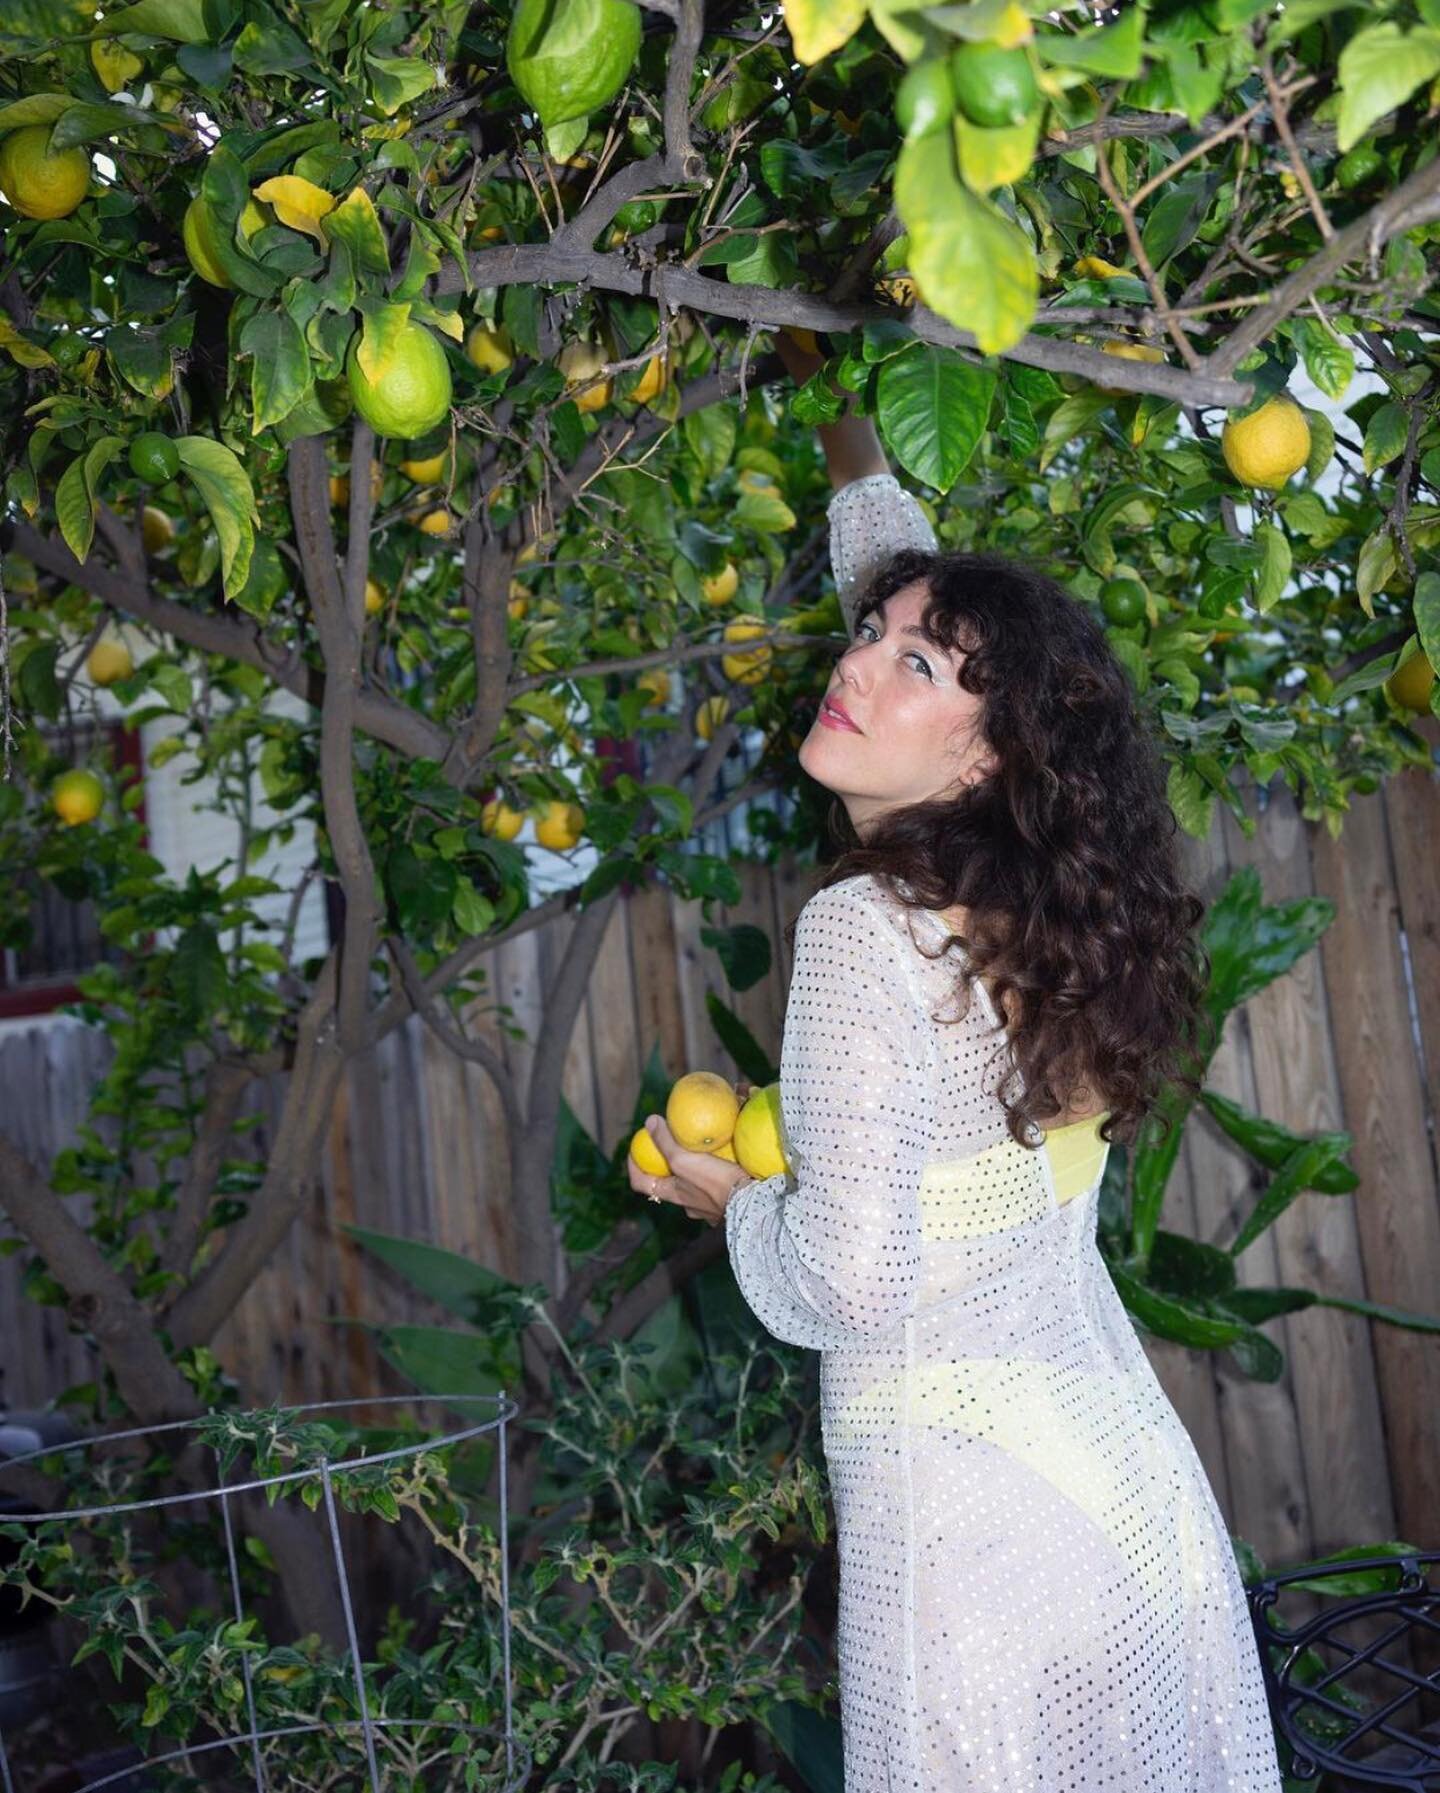 💛LILA💛
My beautiful citrus goddess, flaunting her curls and her lemons✨🍋